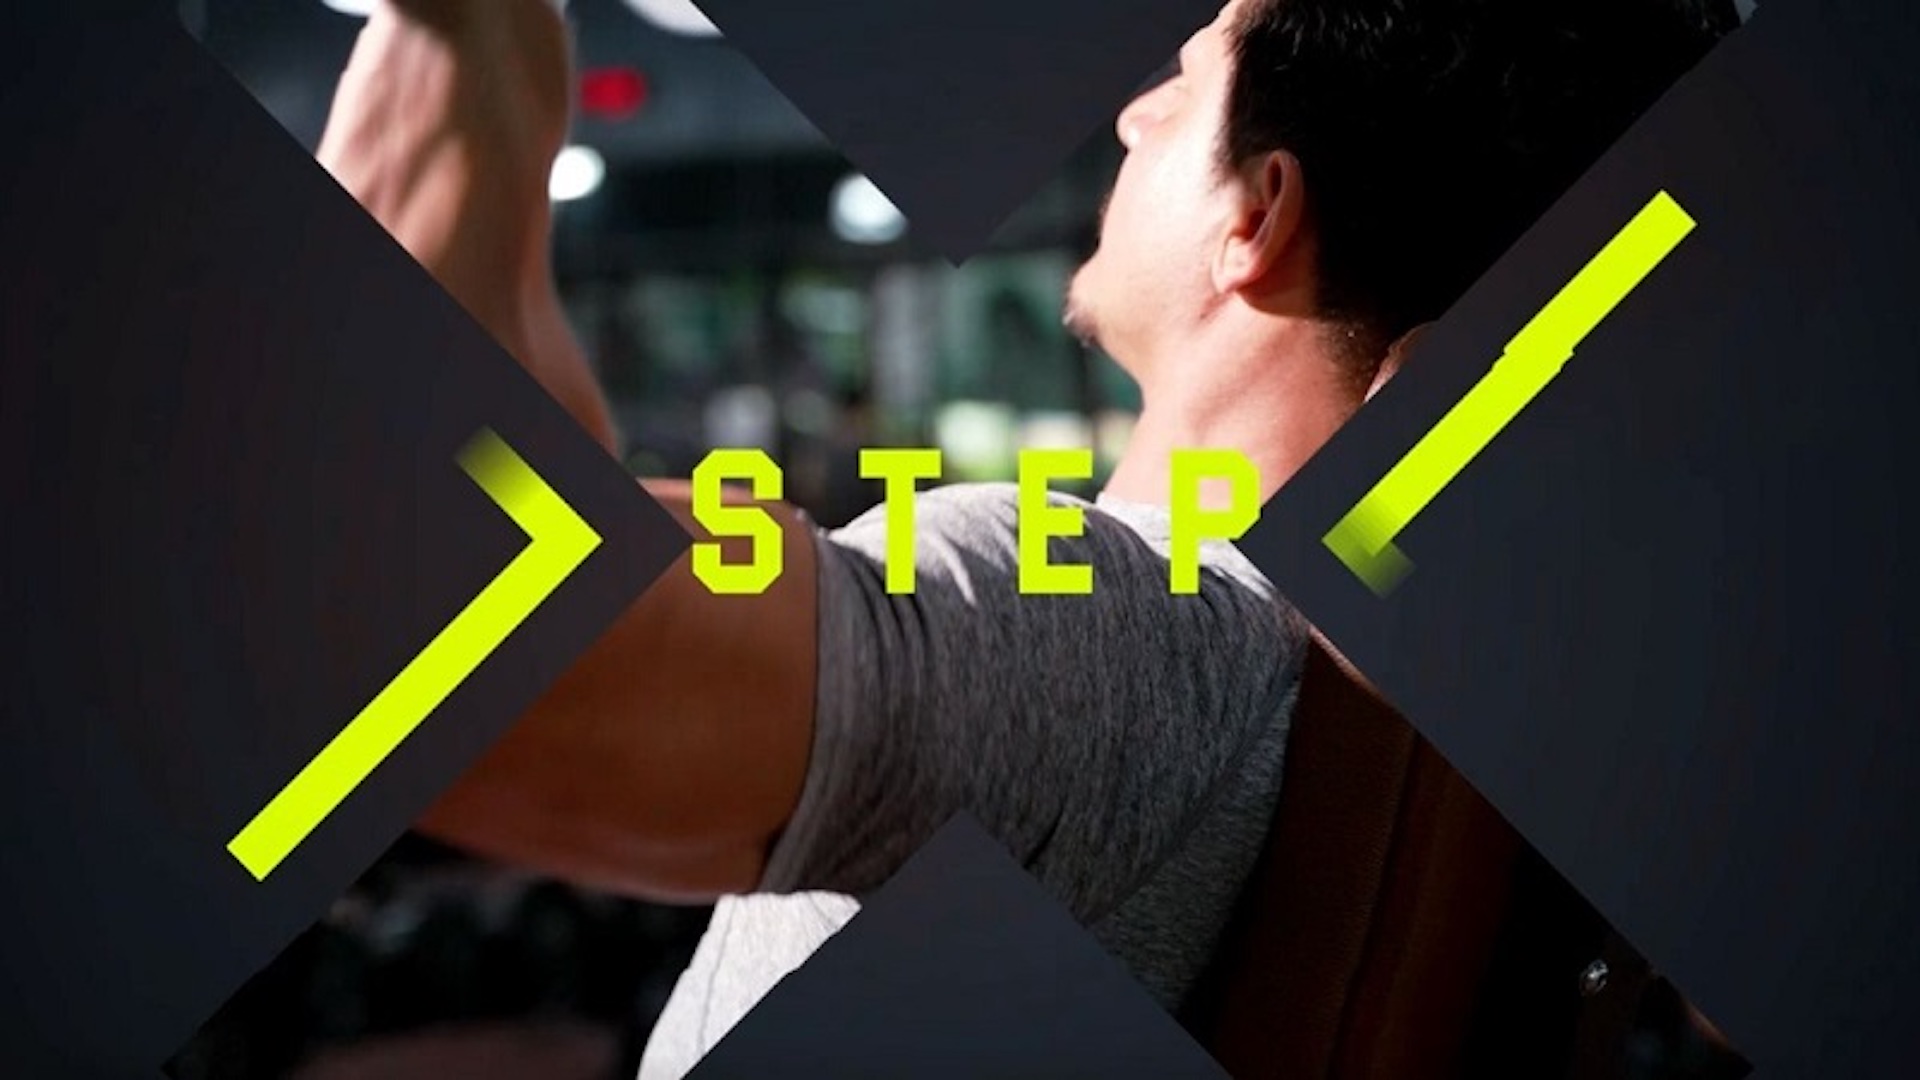 Fitness App Step rewards users for staying active